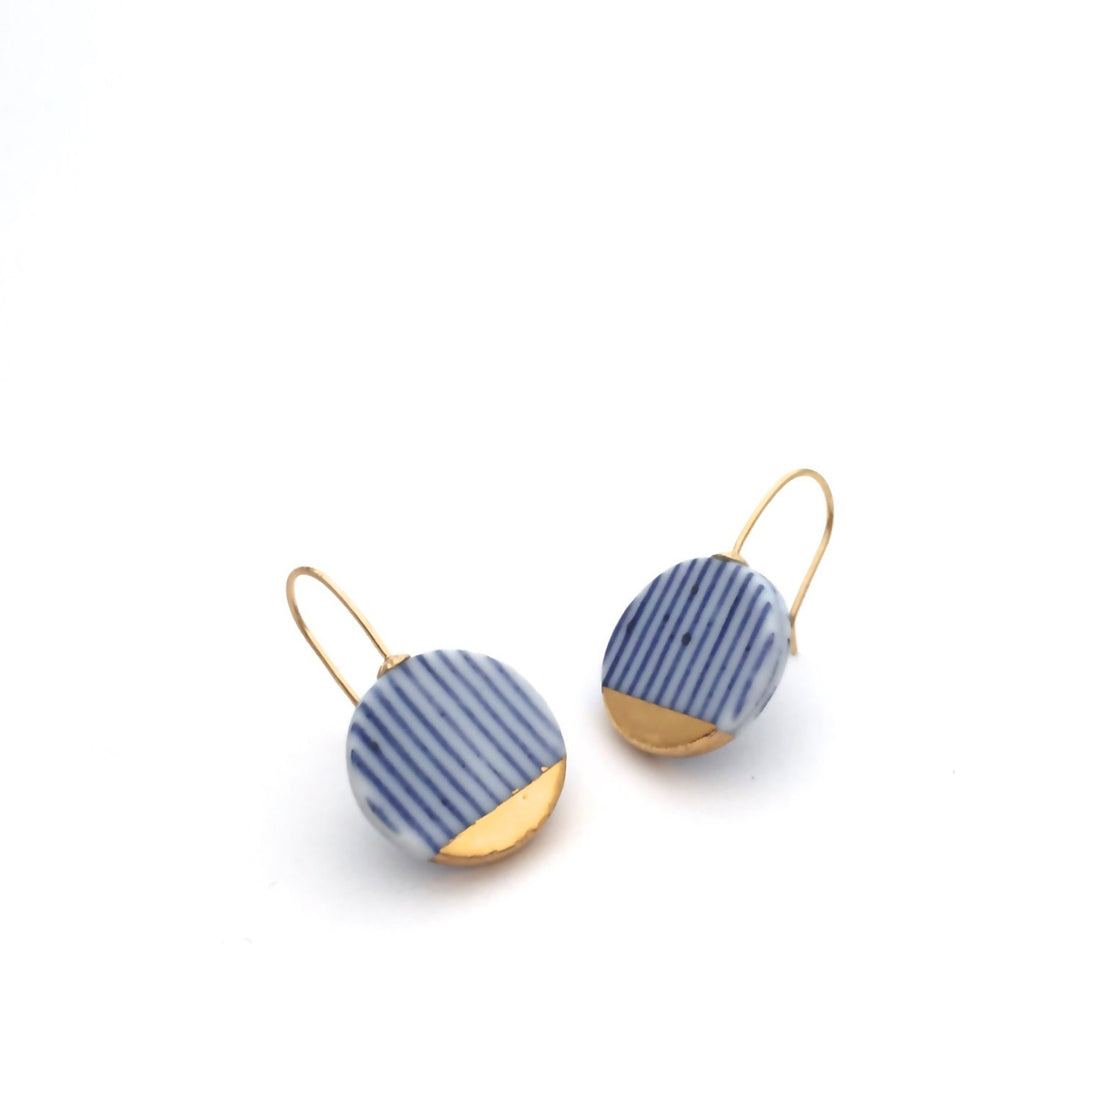 Blue white stripes ceramic gold earrings from Delft, ceramic and porcelain ware by OeiCeramics